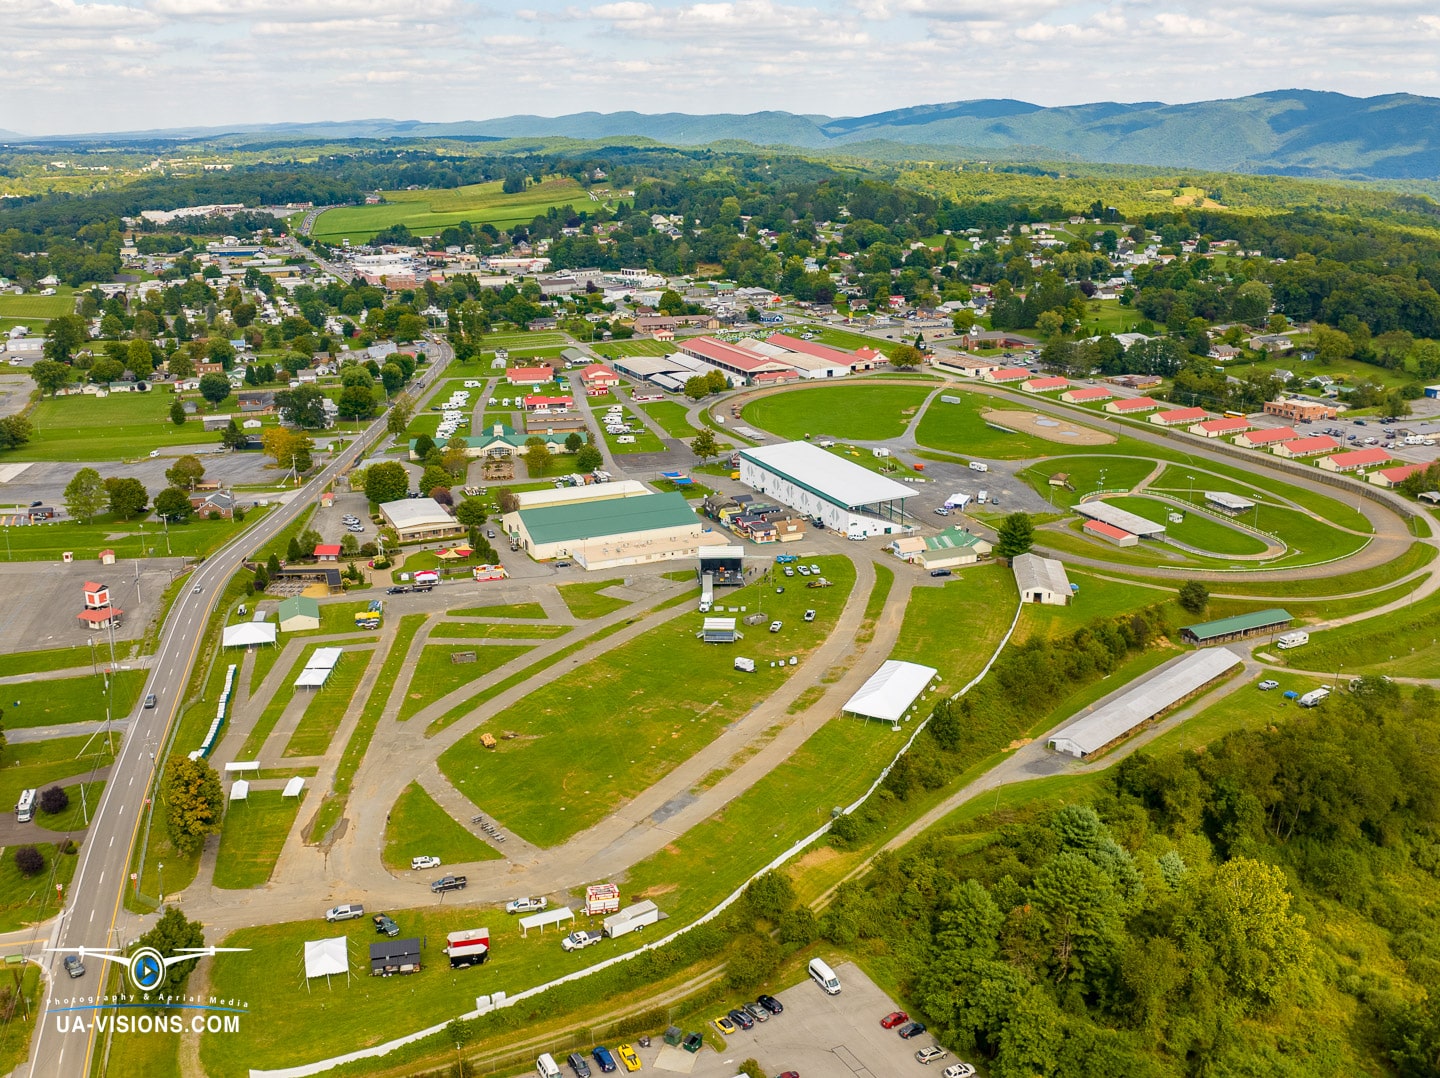 Aerial view of a vibrant community event space in Appalachia, showcasing diverse facilities and green spaces.